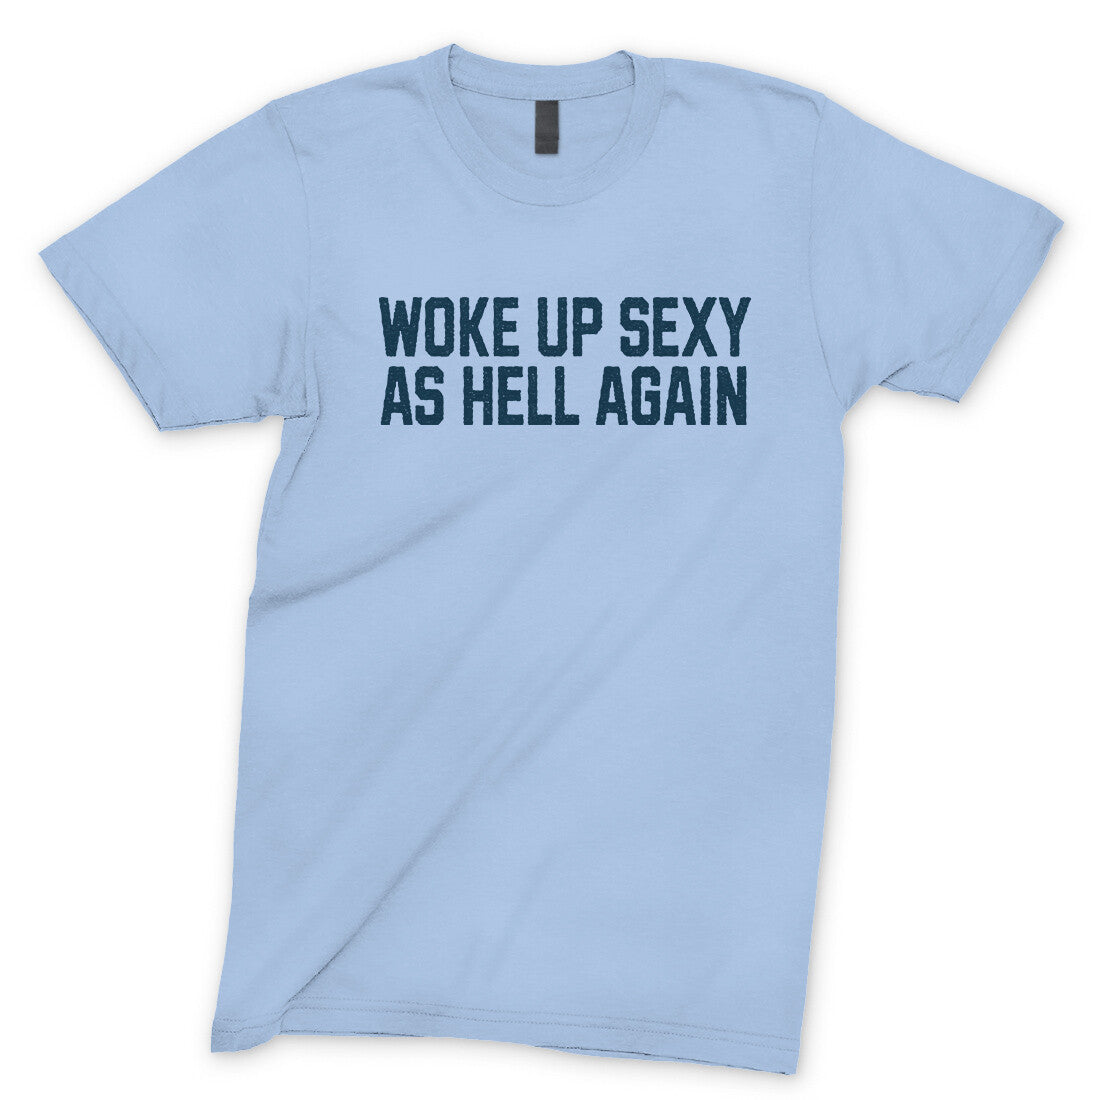 Woke Up Sexy as Hell in Light Blue Color